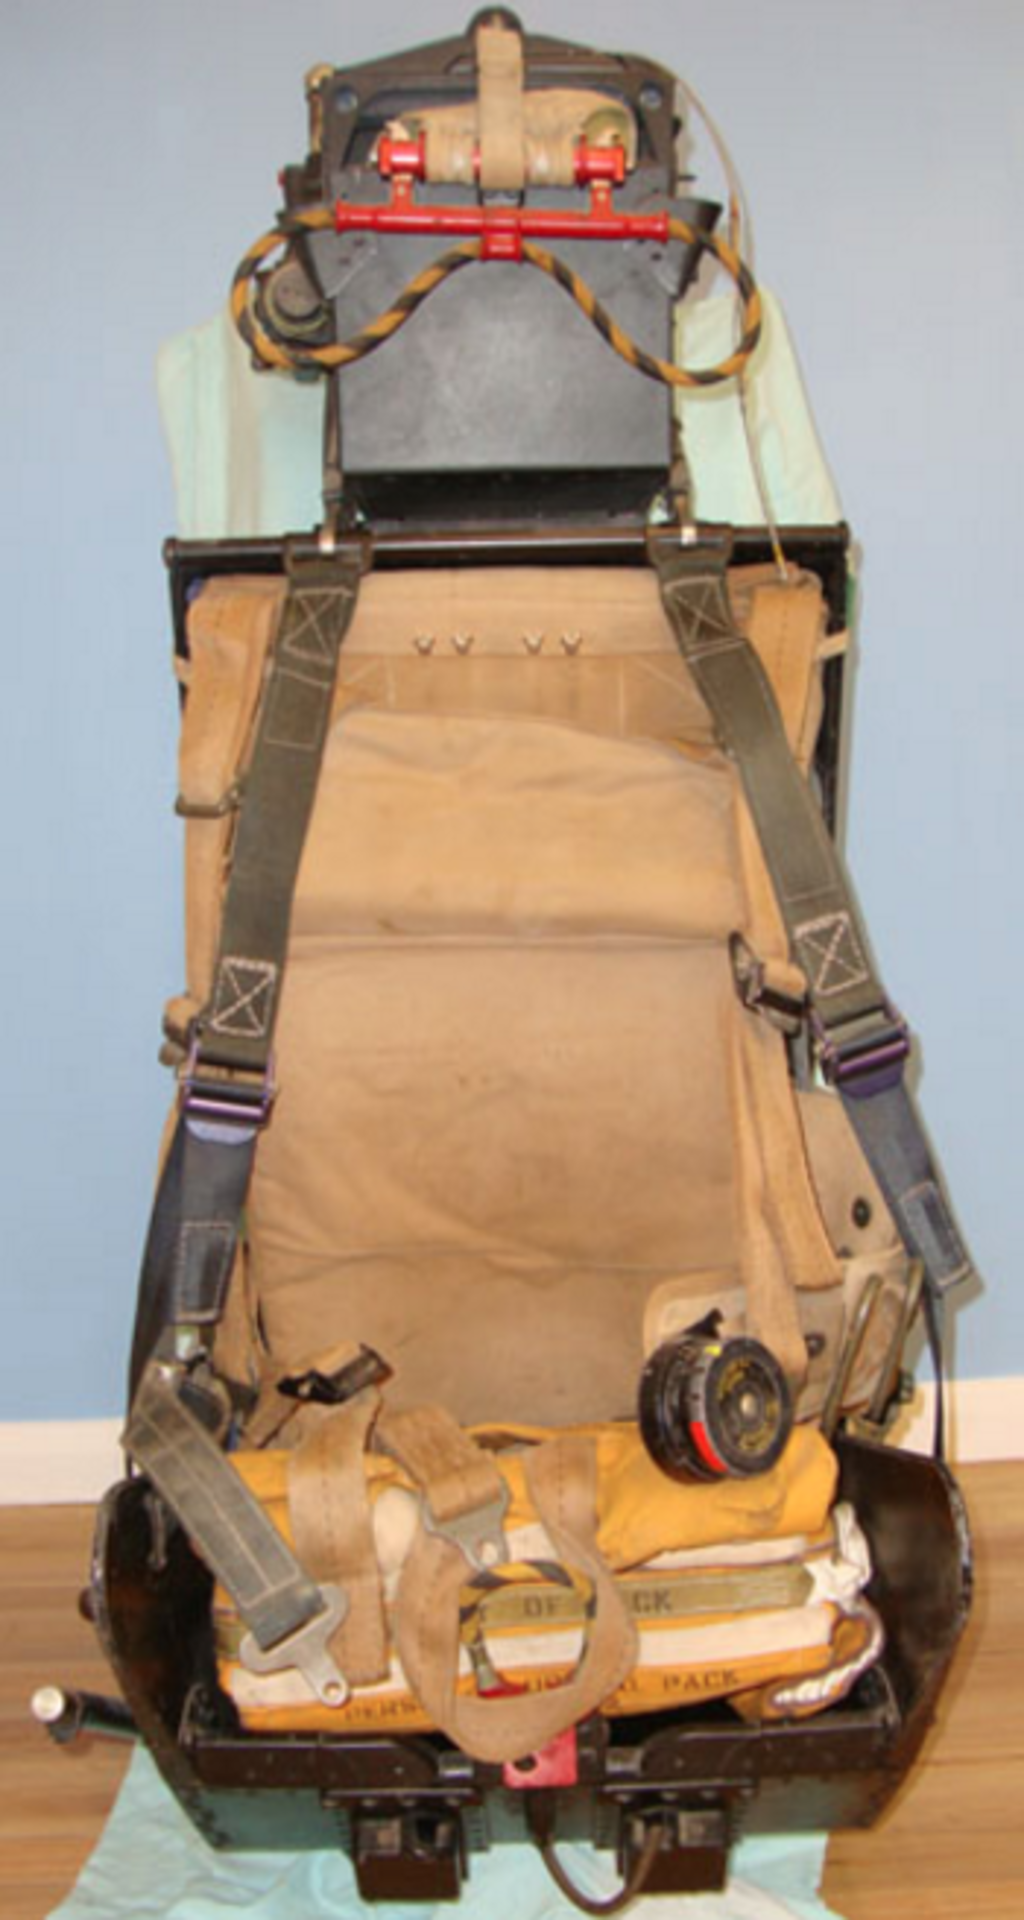 COMPLETE, Post 1951, MK 2 HA (N) Martin Patent Ejector Seat